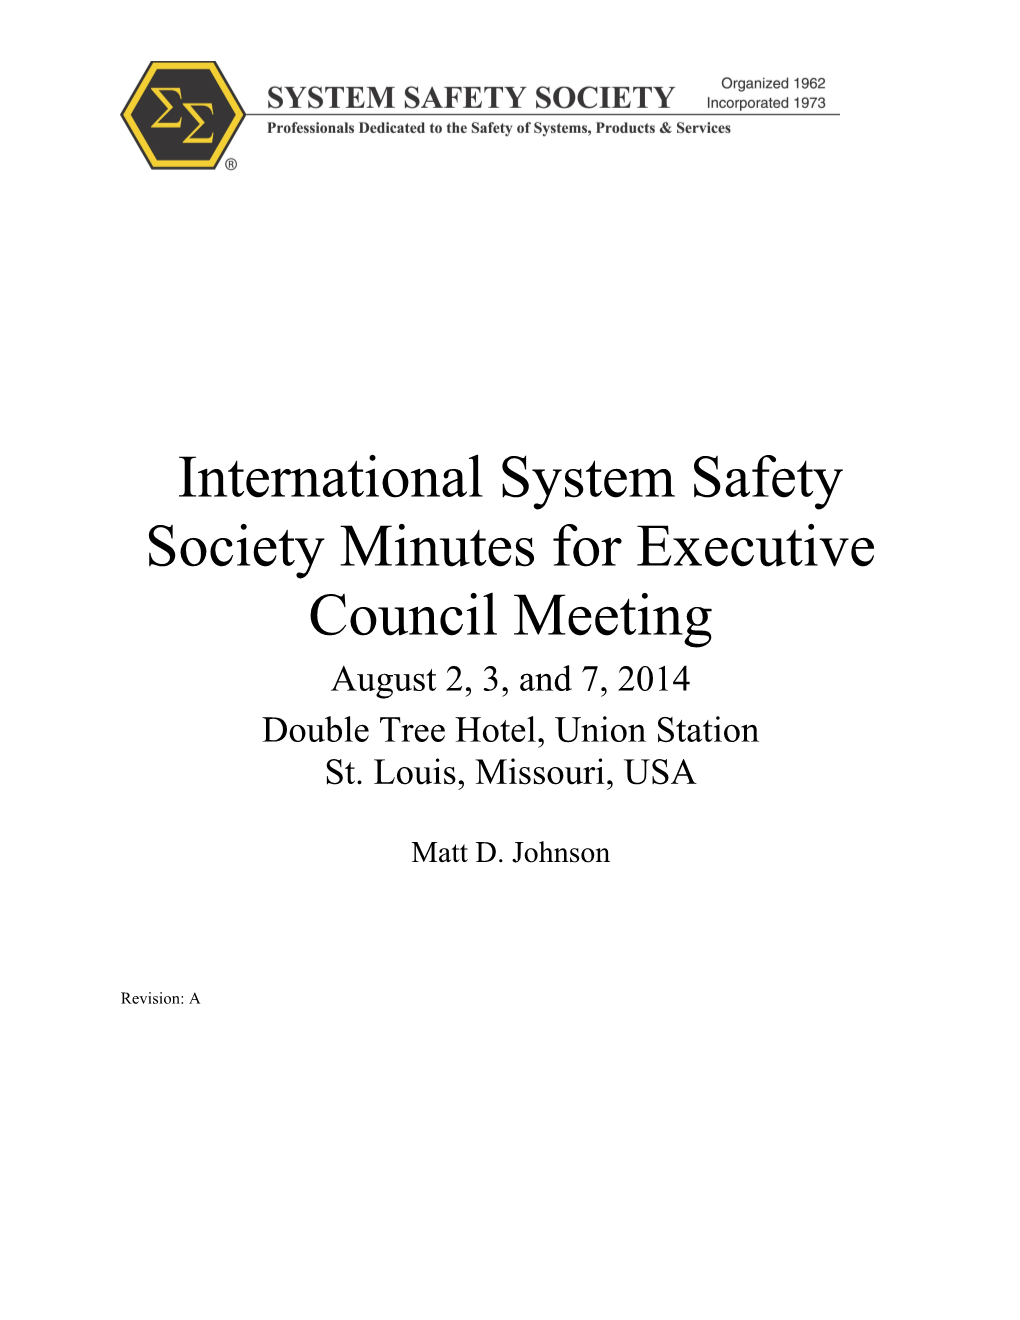 Minutes for the Executive Council Meeting of the International System Safety Society